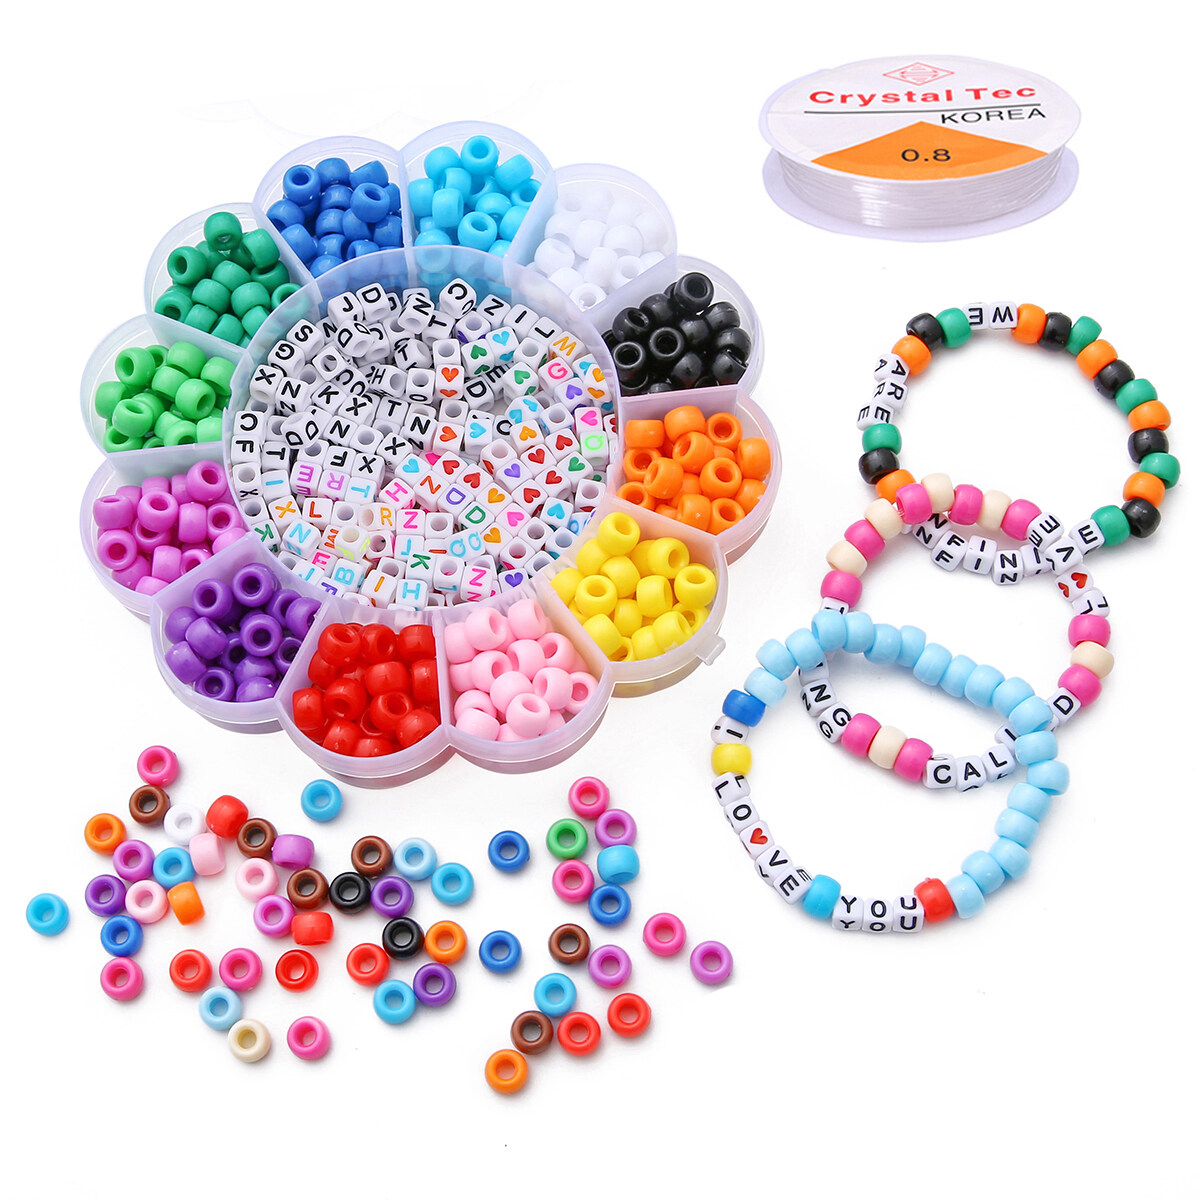 Beads Set 6000 Pieces DIY Beads Kit; 28 Different Types & 4 Color Strings for Jewelry Necklace Making Friendship Bracelet Making and Valentines Day Children Arts & Crafts Beads by JOYIN 